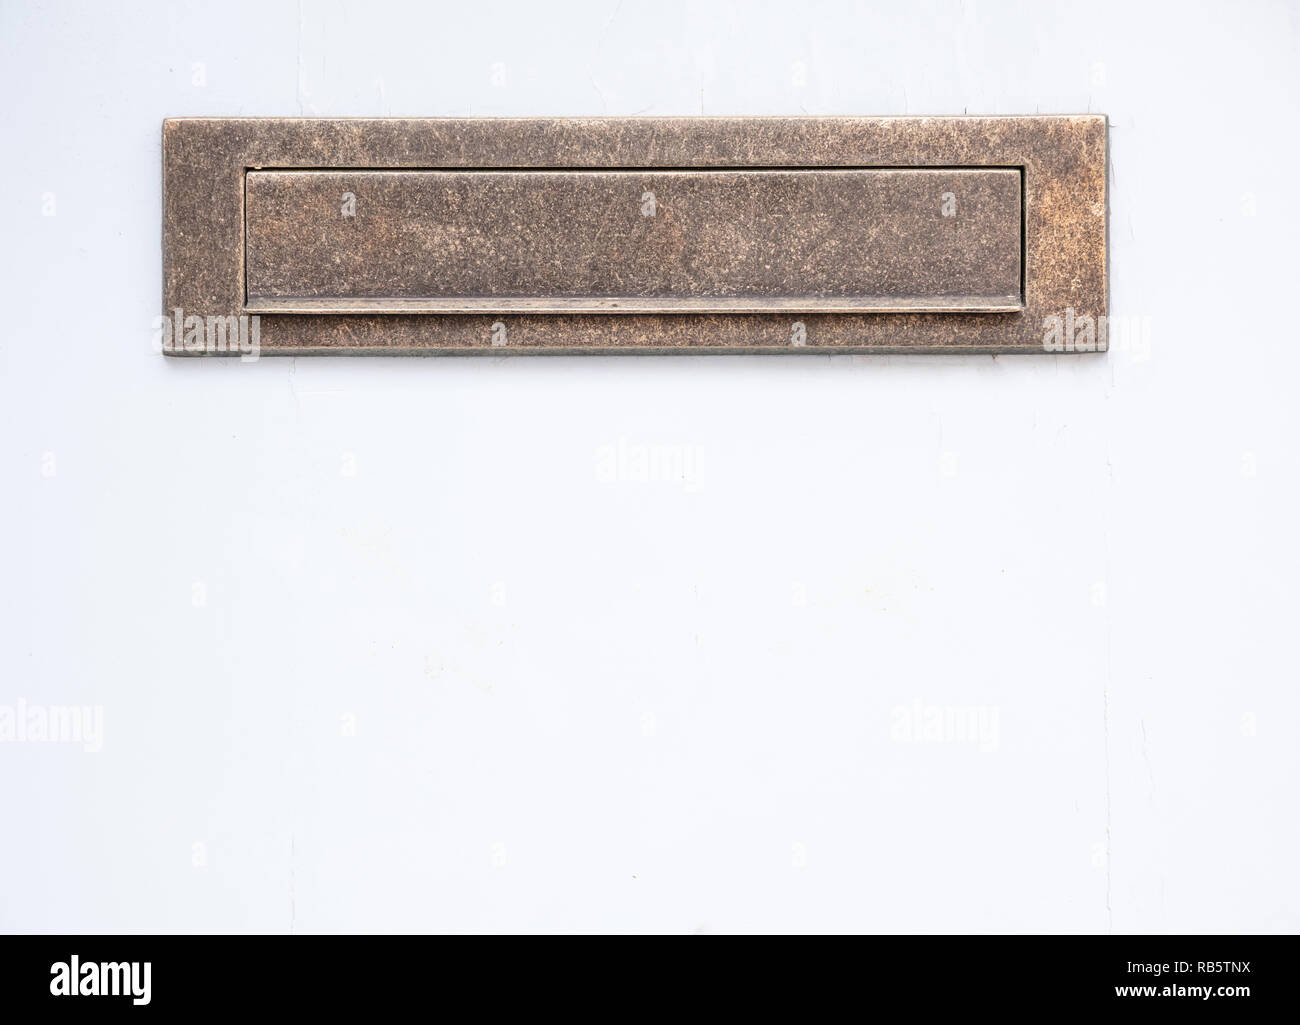 Old bronze mailbox. Brass vintage mail letter box on white color wall background. Closeup view with details Stock Photo